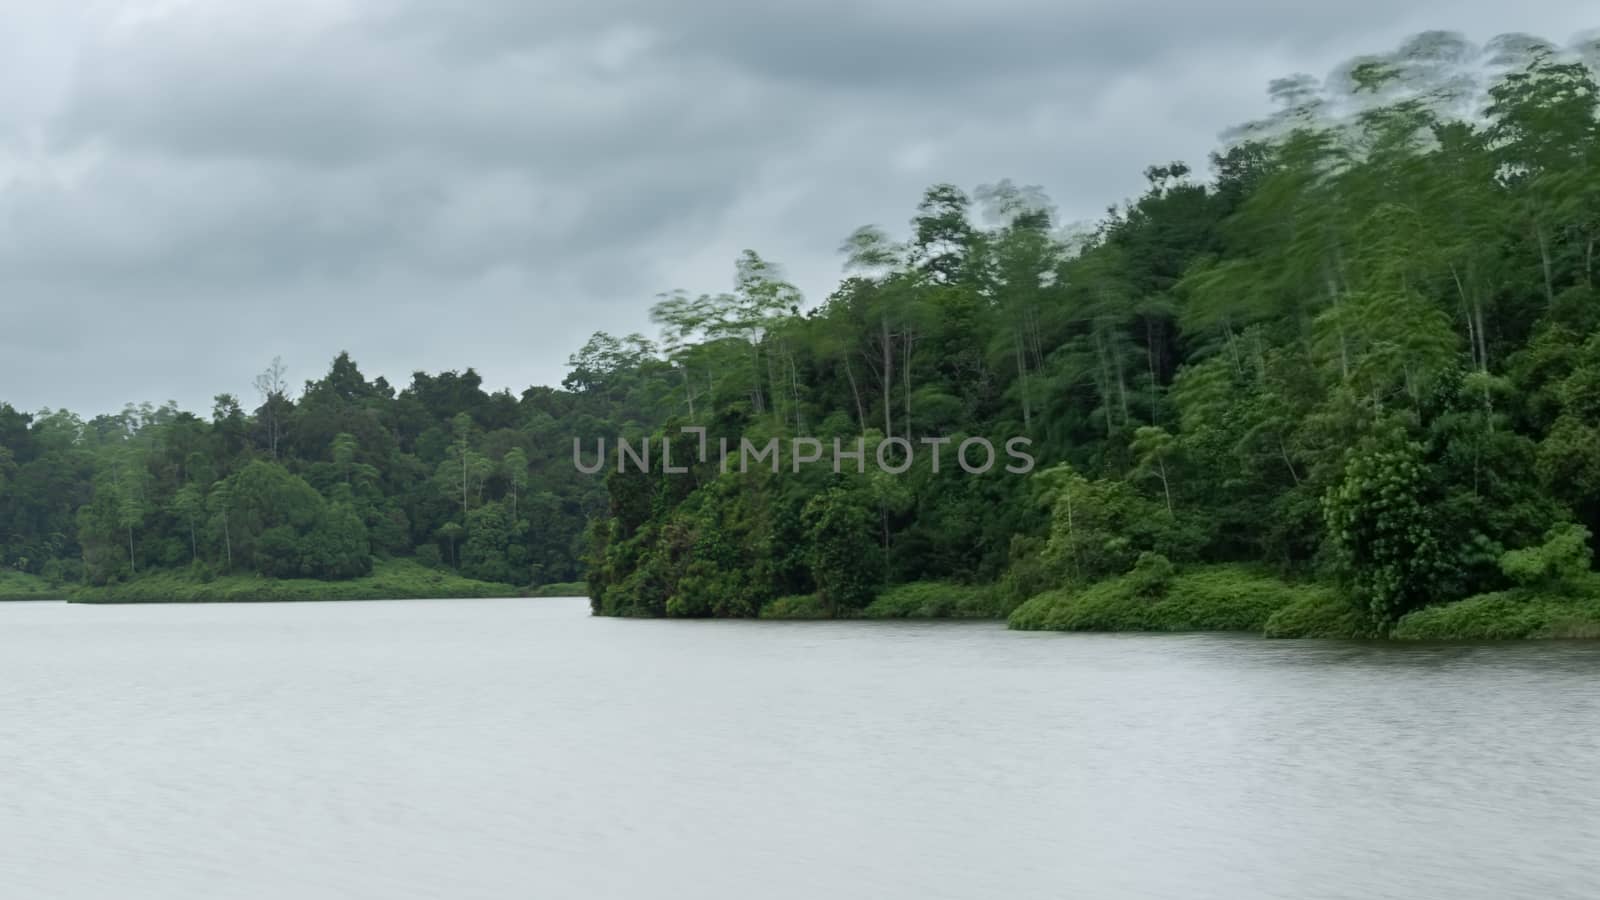 Long exposure photograph of Hiyare reservoir and forest moody atmosphere.